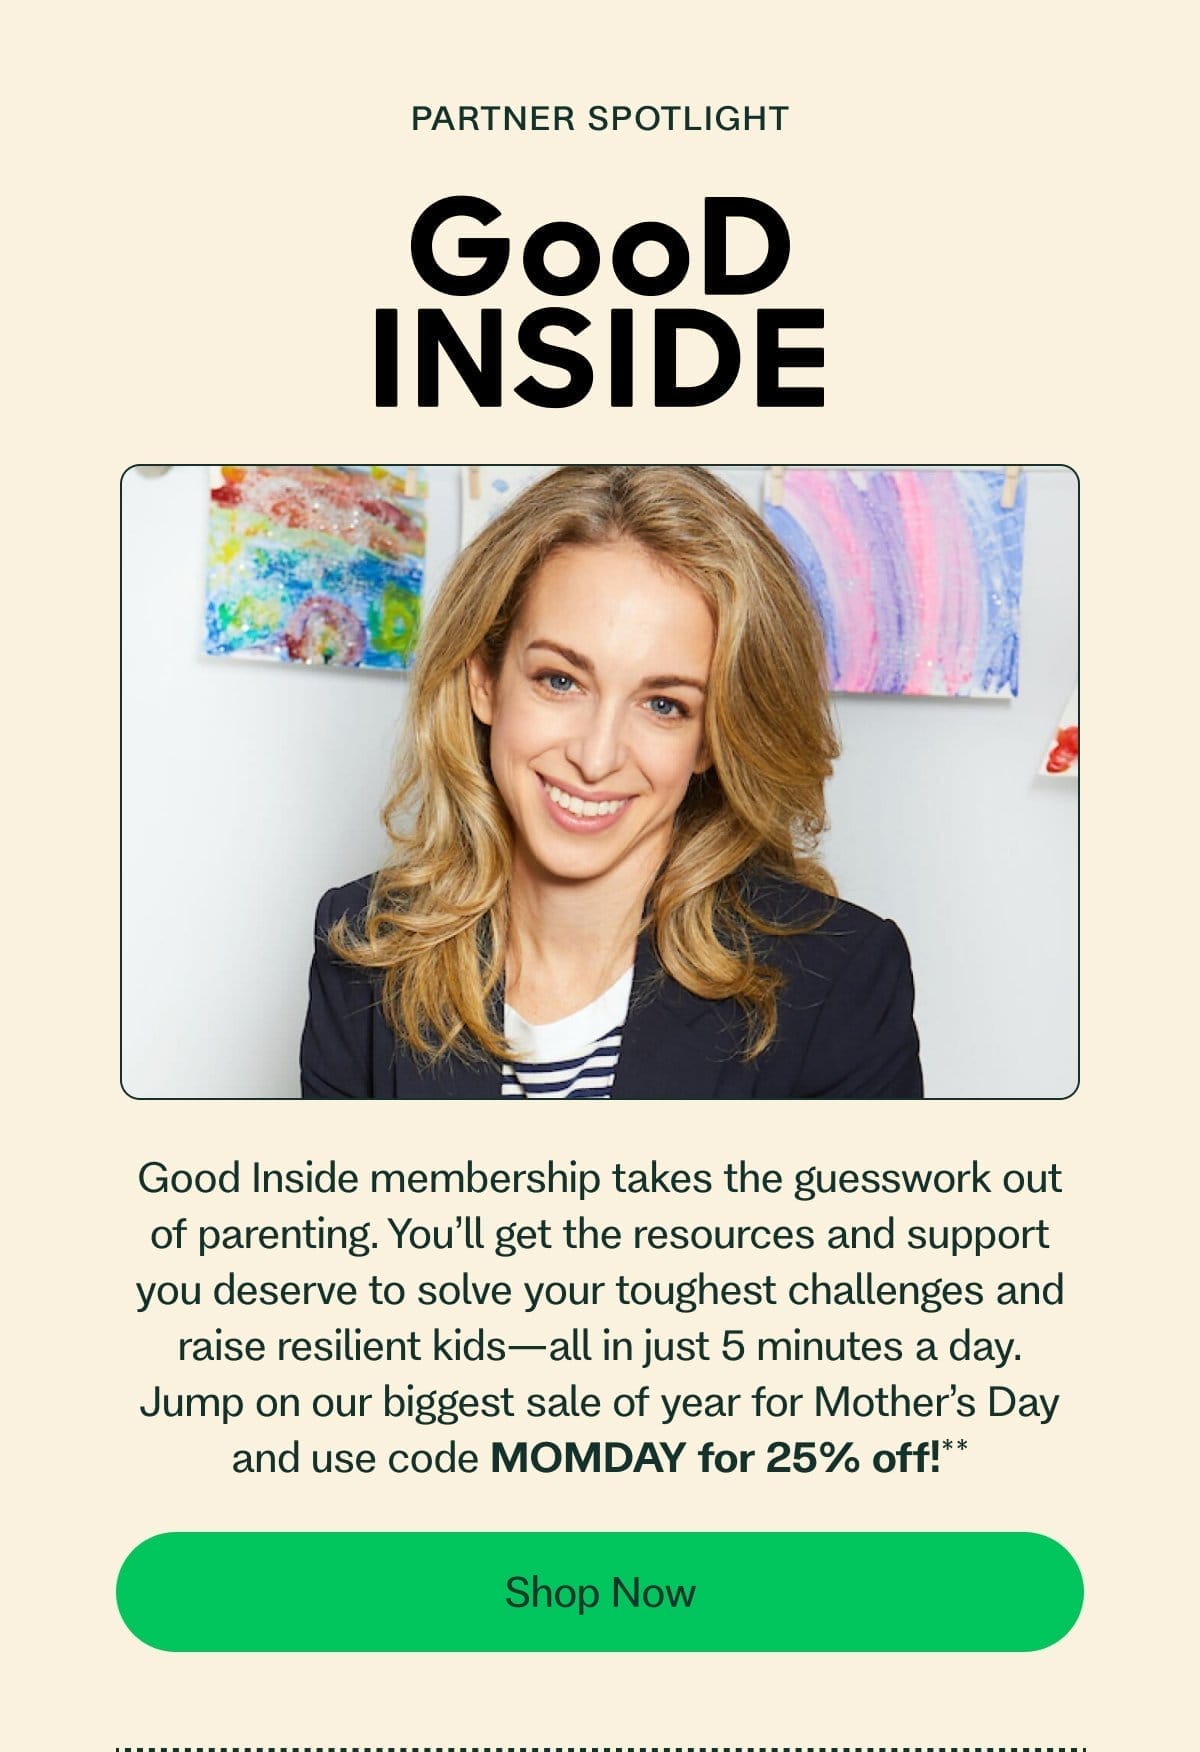 Partner Spotlight Good Inside membership takes the guesswork out of parenting. You’ll get the resources and support you deserve to solve your toughest challenges and raise resilient kids—all in just 5 minutes a day. Jump on our biggest sale of year for Mother’s Day and use code MOMDAY for 25% off!** Shop Now